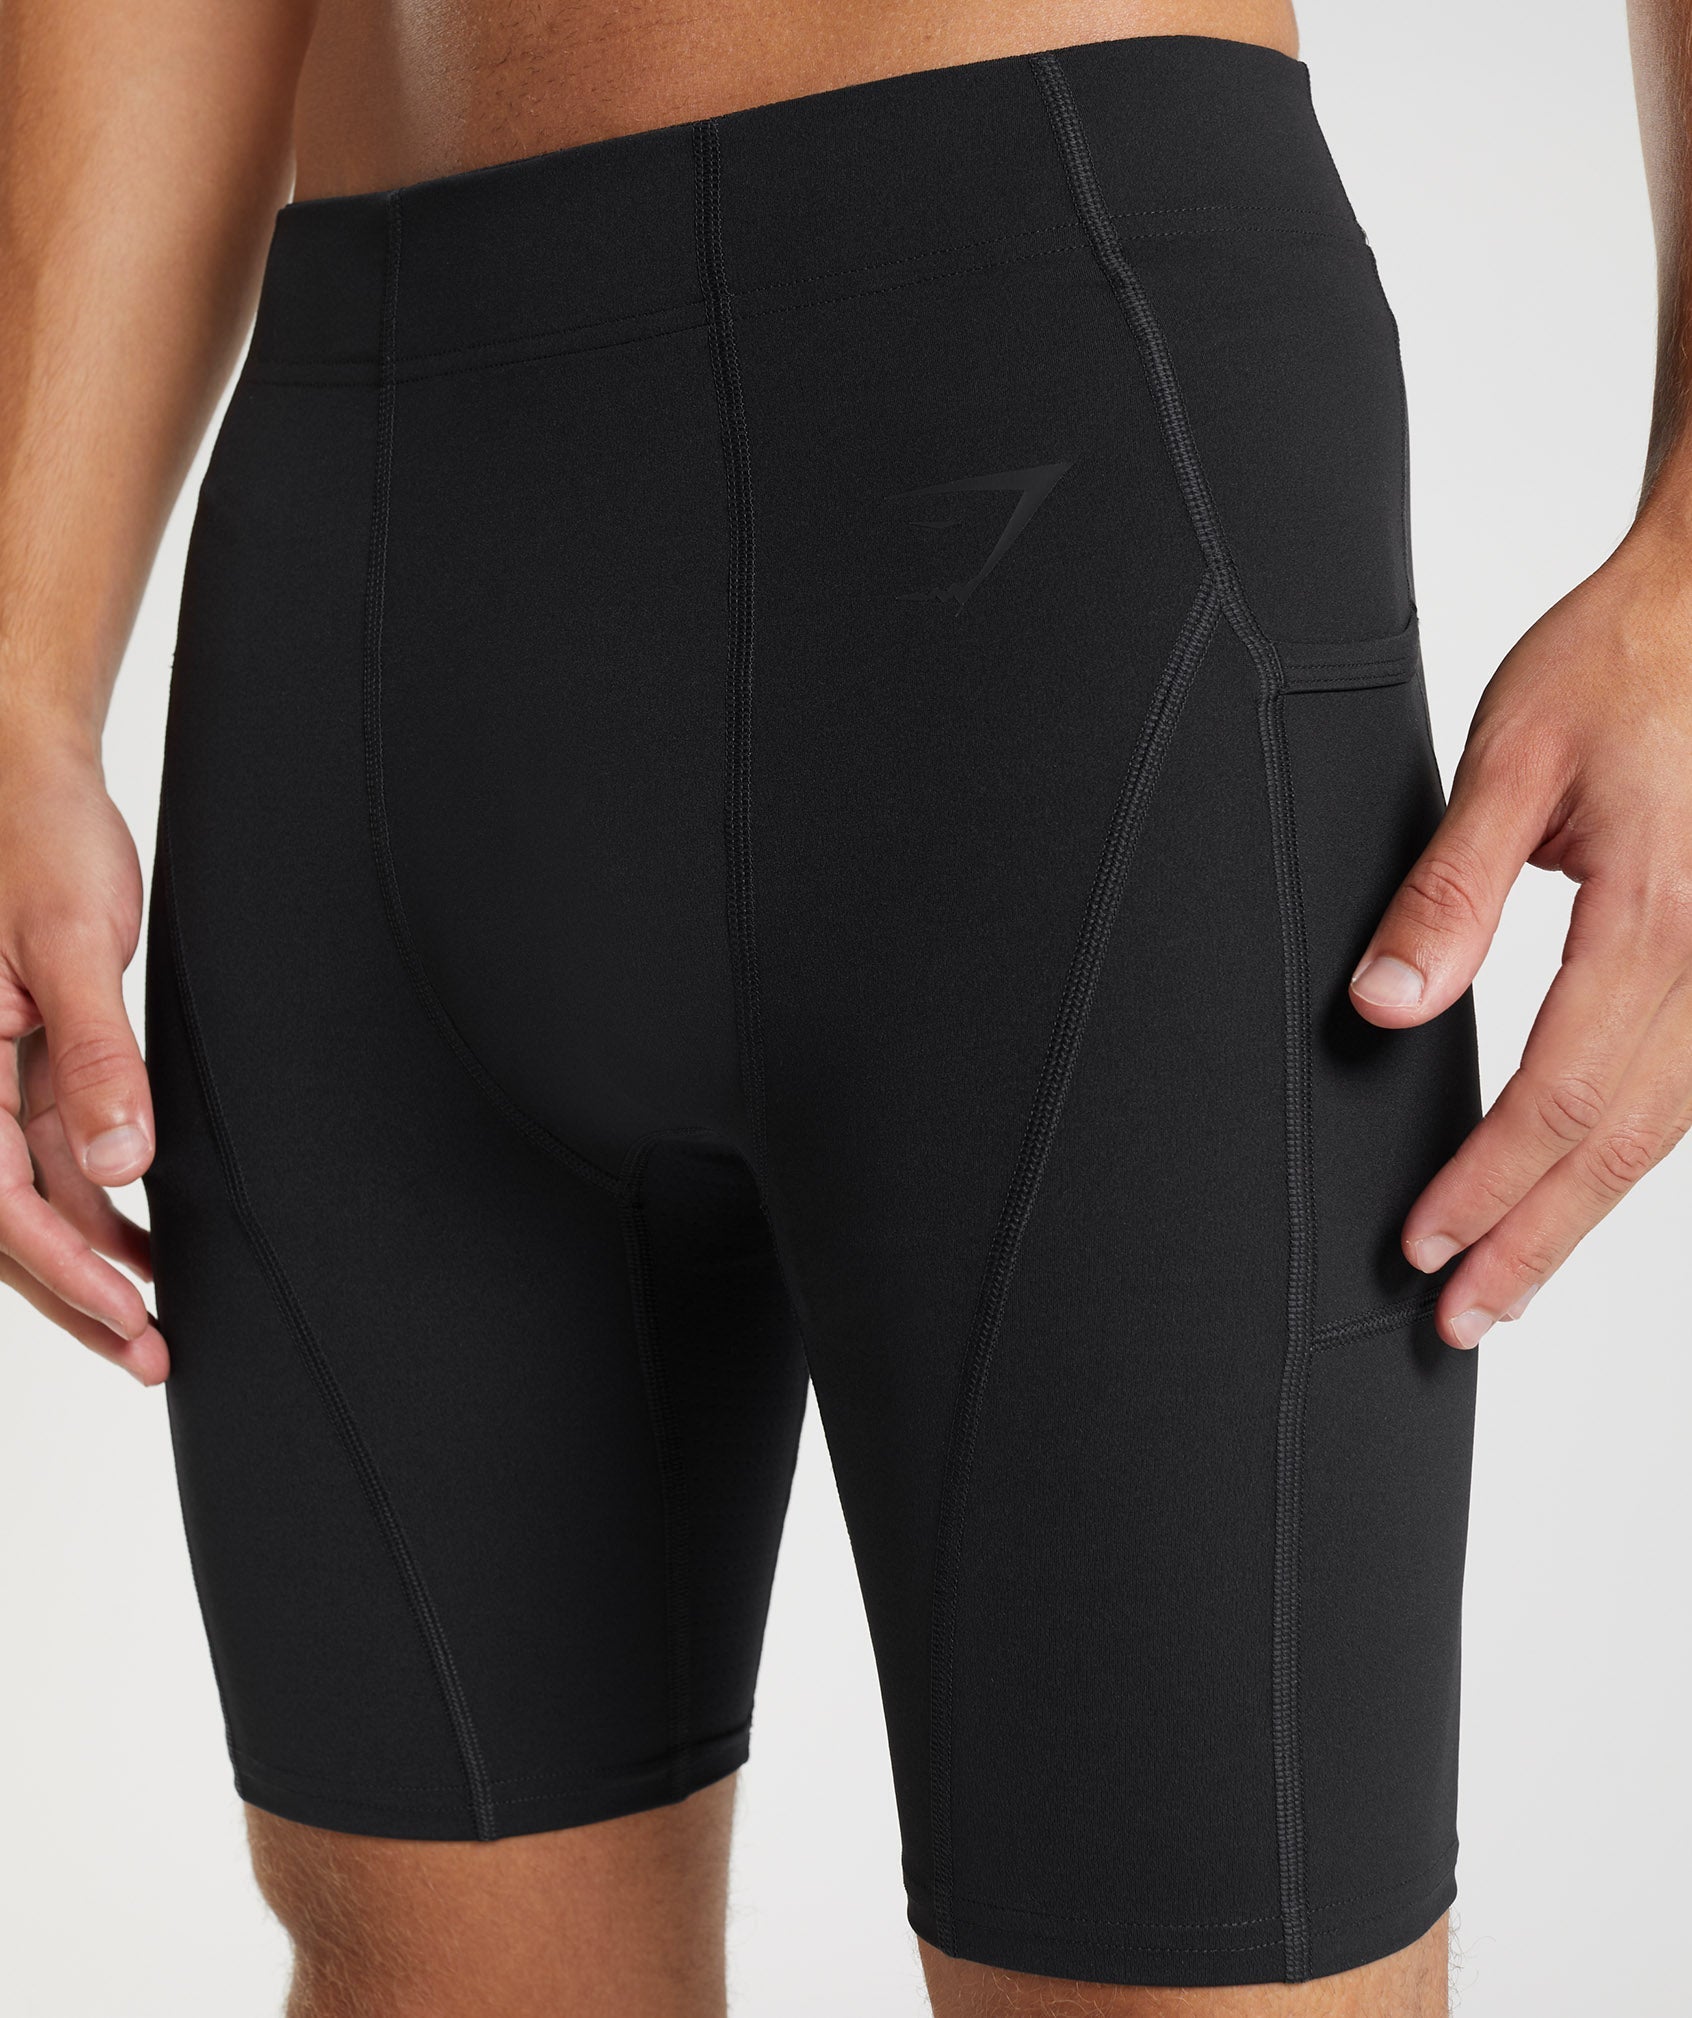 Control Baselayer Shorts in Black - view 5